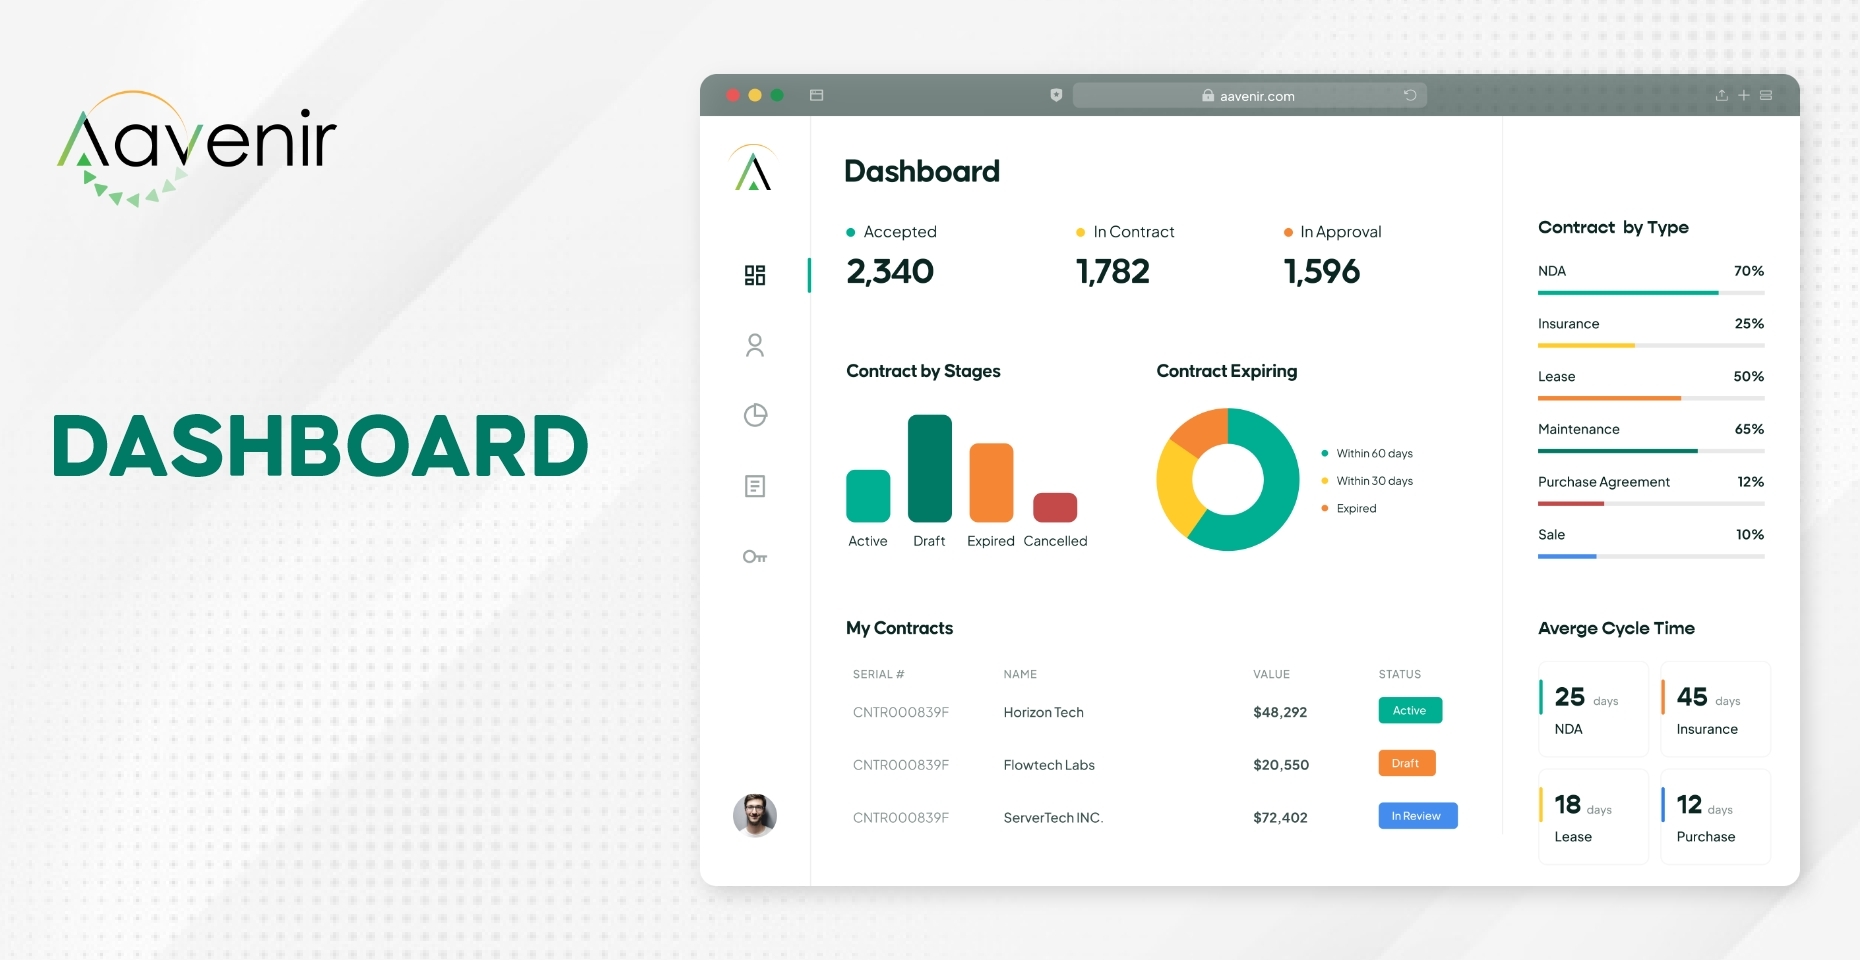 What are the different types of dashboards?